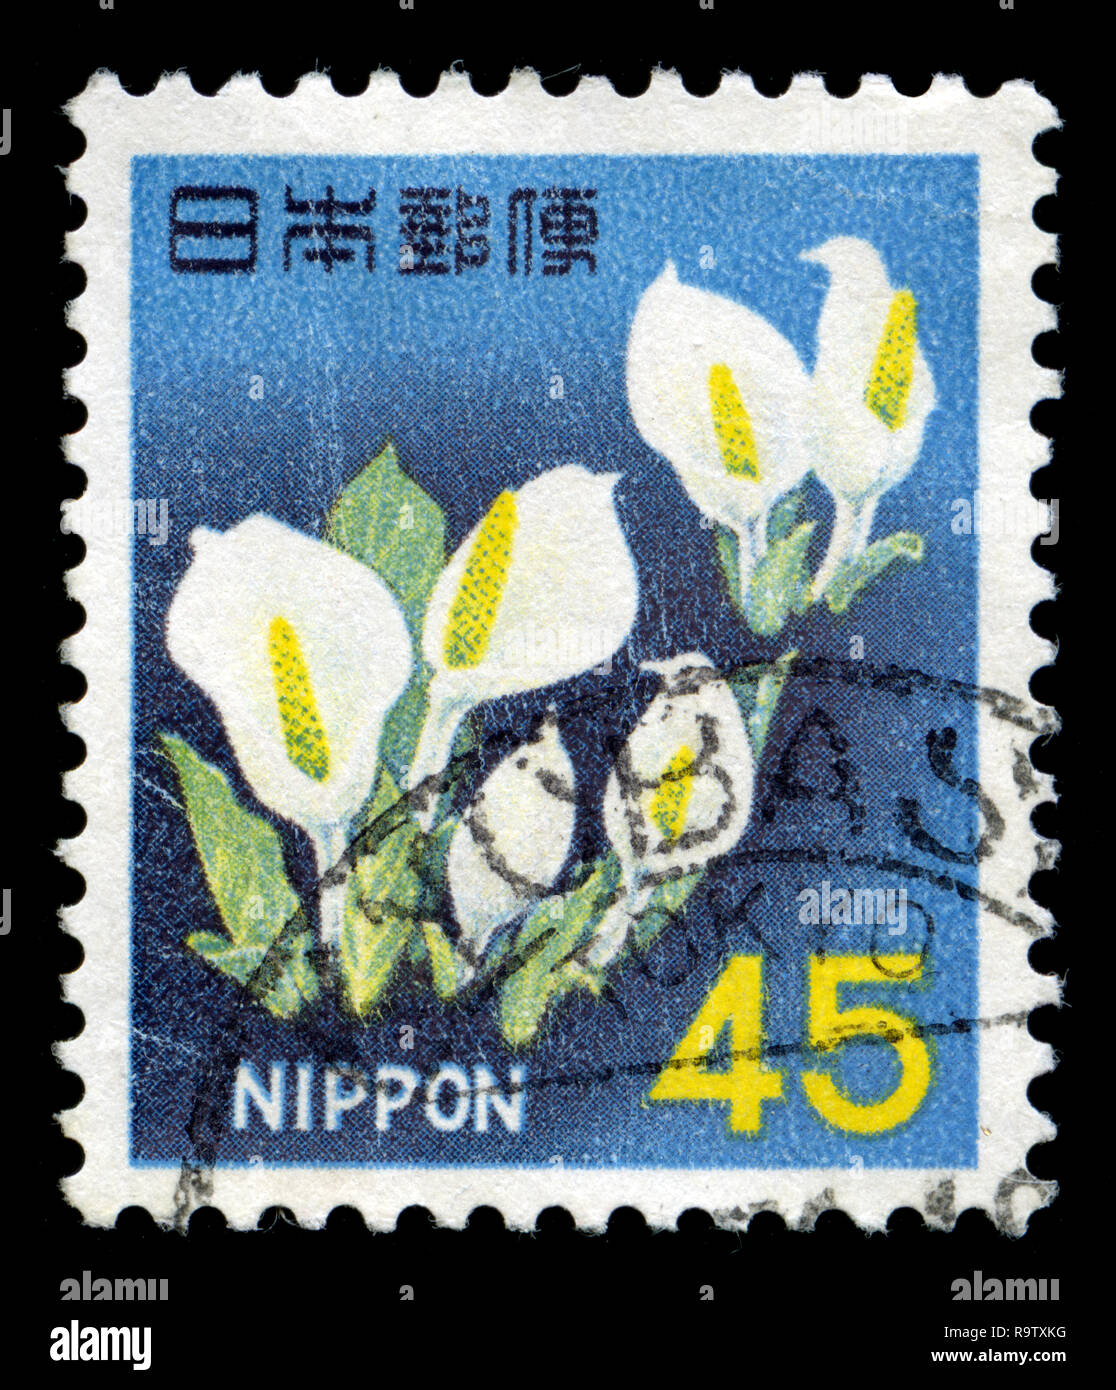 Postage stamp from Japan in the Fauna, Flora and Cultural Heritage series issued in 1967 Stock Photo